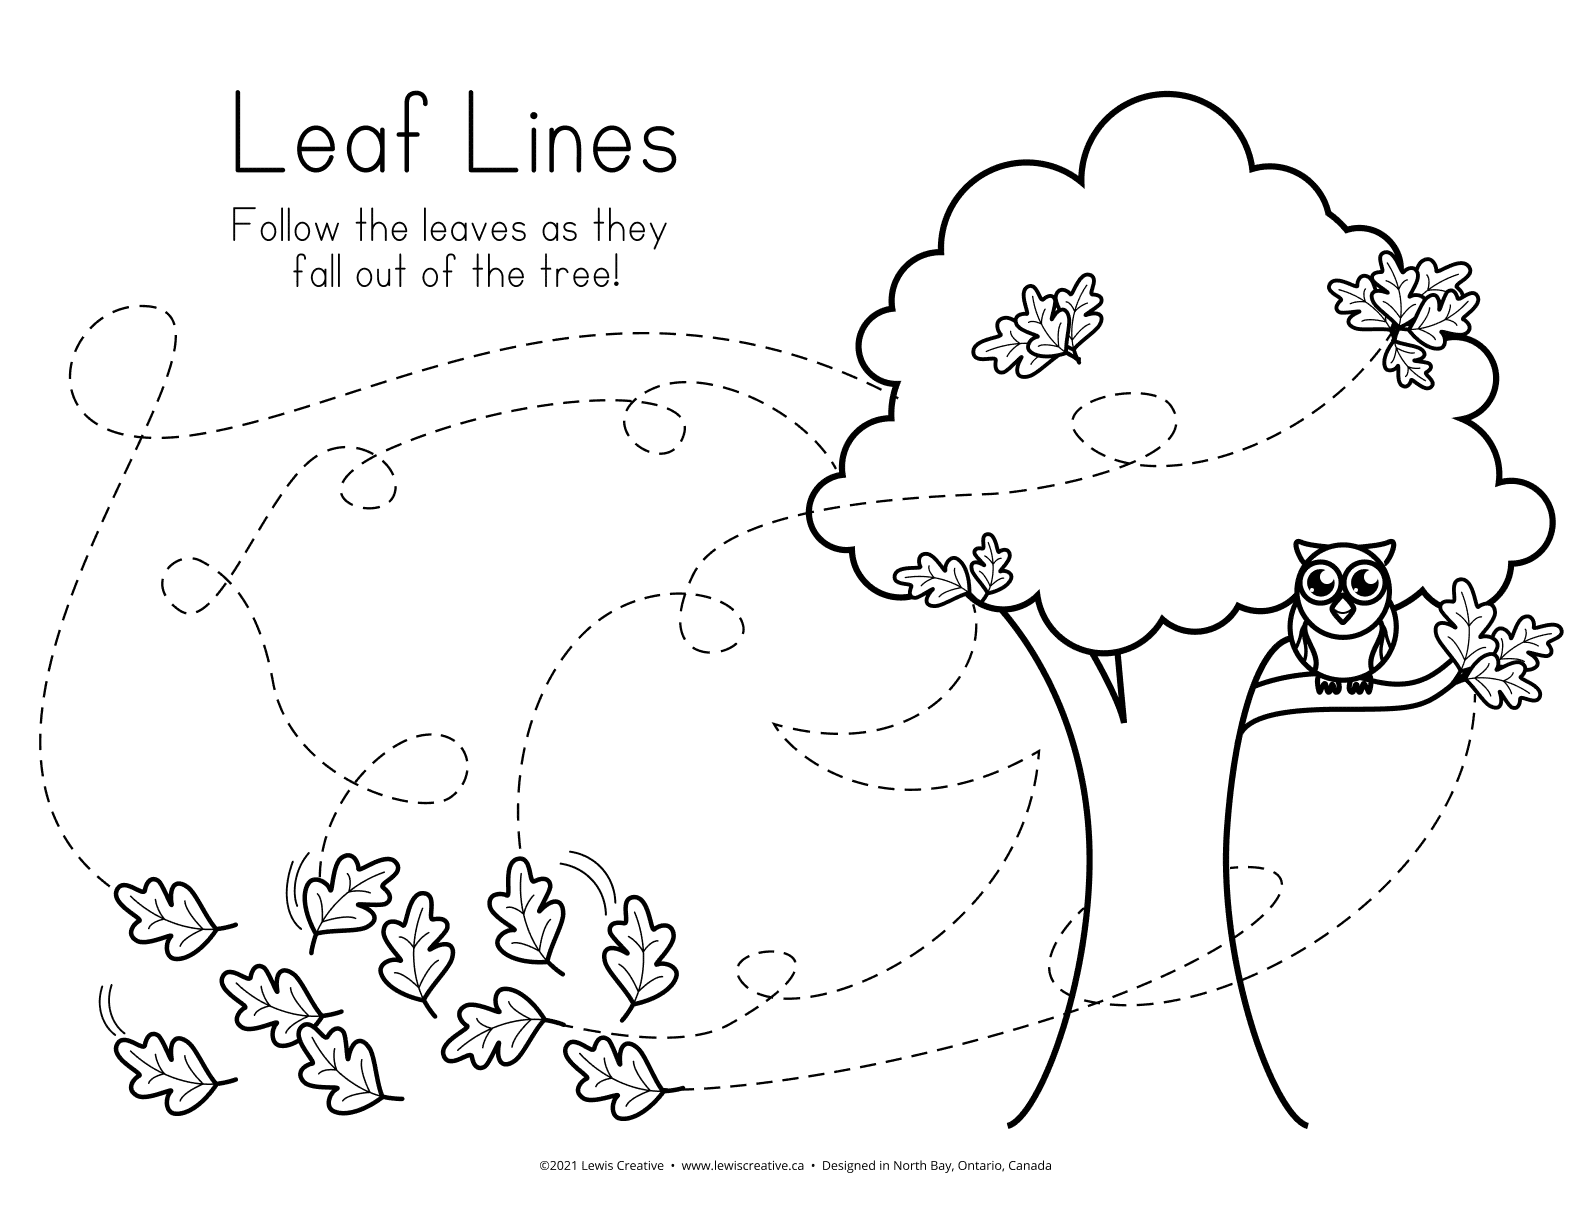 Fall Themed Follow the lines activity - Free Worksheet - Lewis Creative